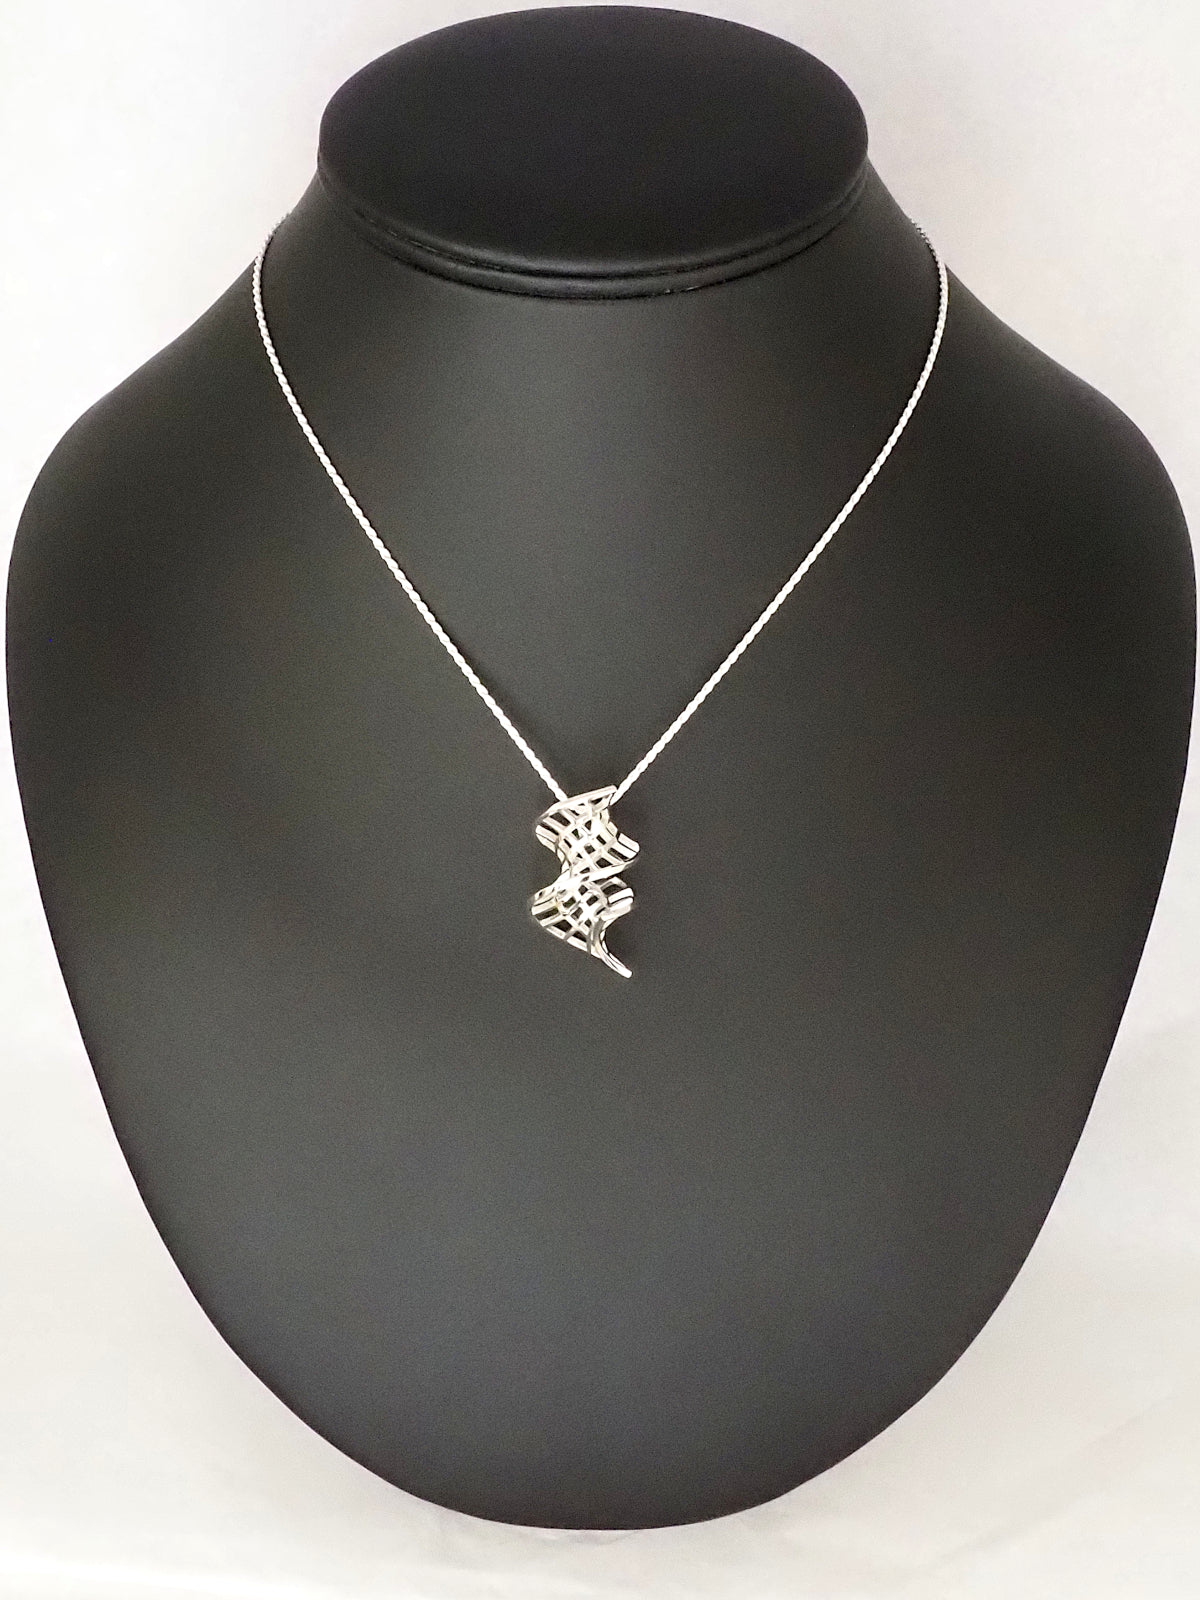 A silver catenoid-helicoid pendant with a silver French rope chain on a necklace display.